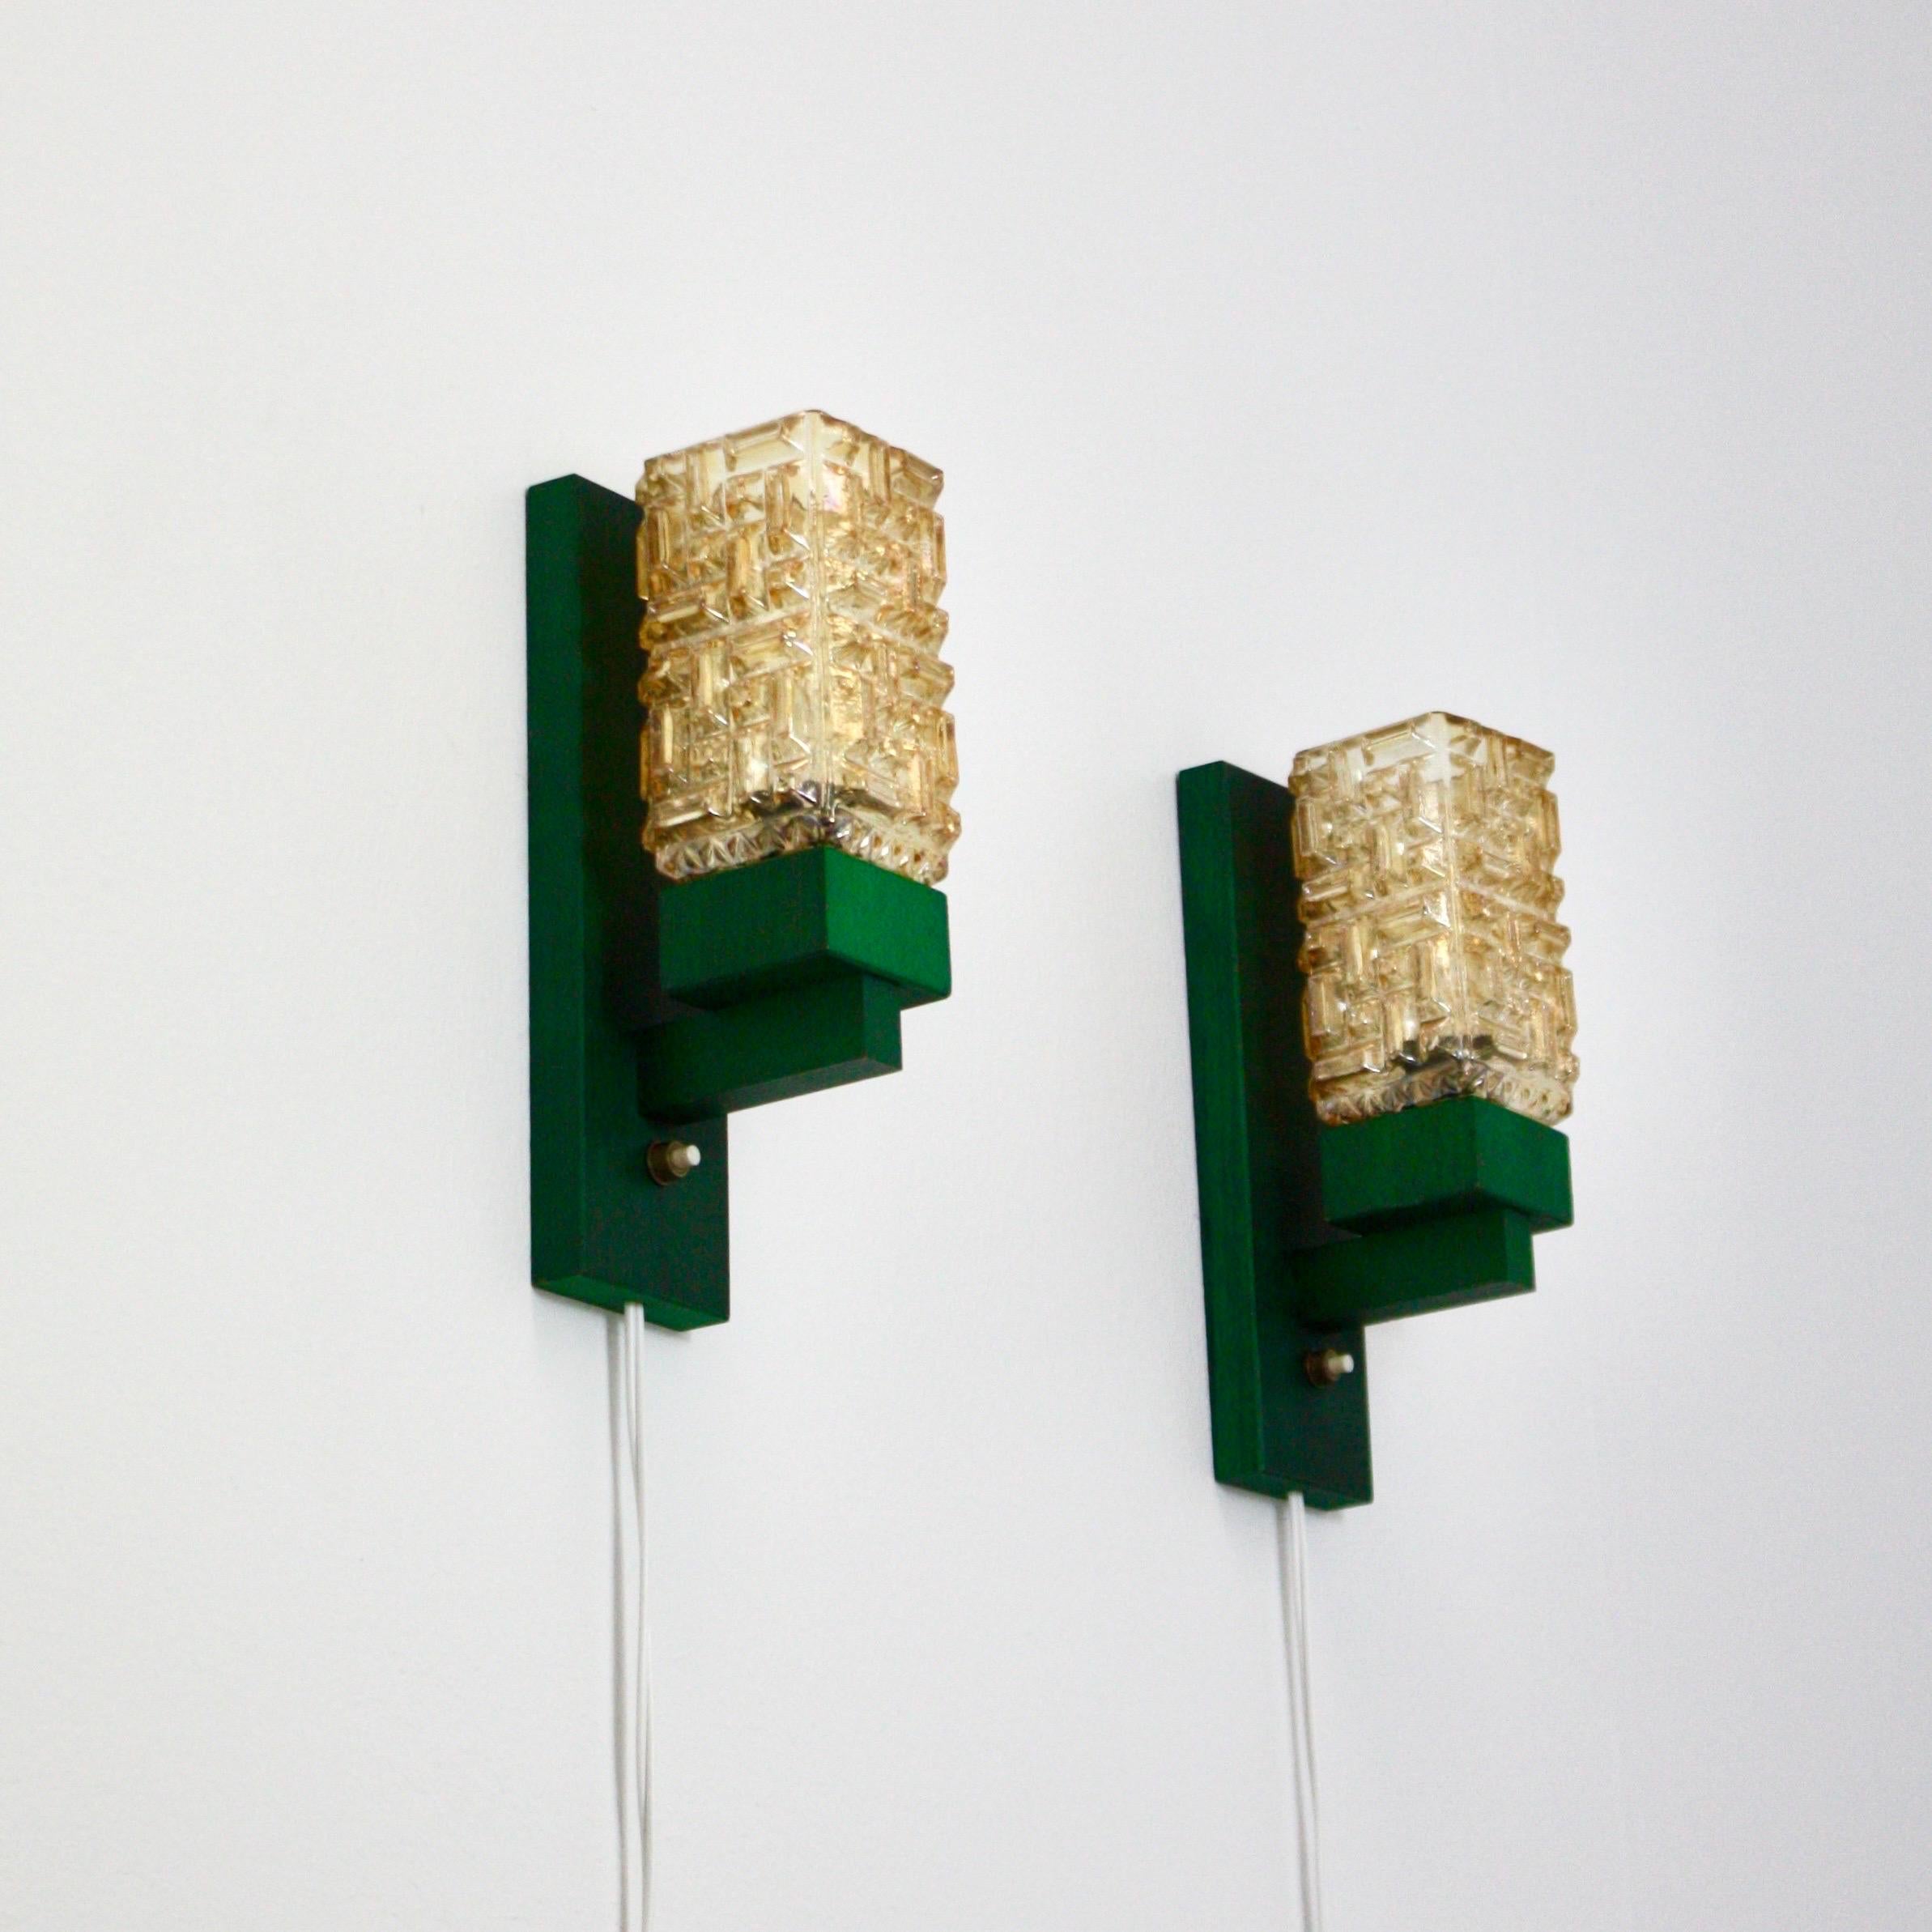 Danish Set of 'Vitrika' Wall Lamps in green stained wood & Amber Glass, Denmark, 1970s For Sale